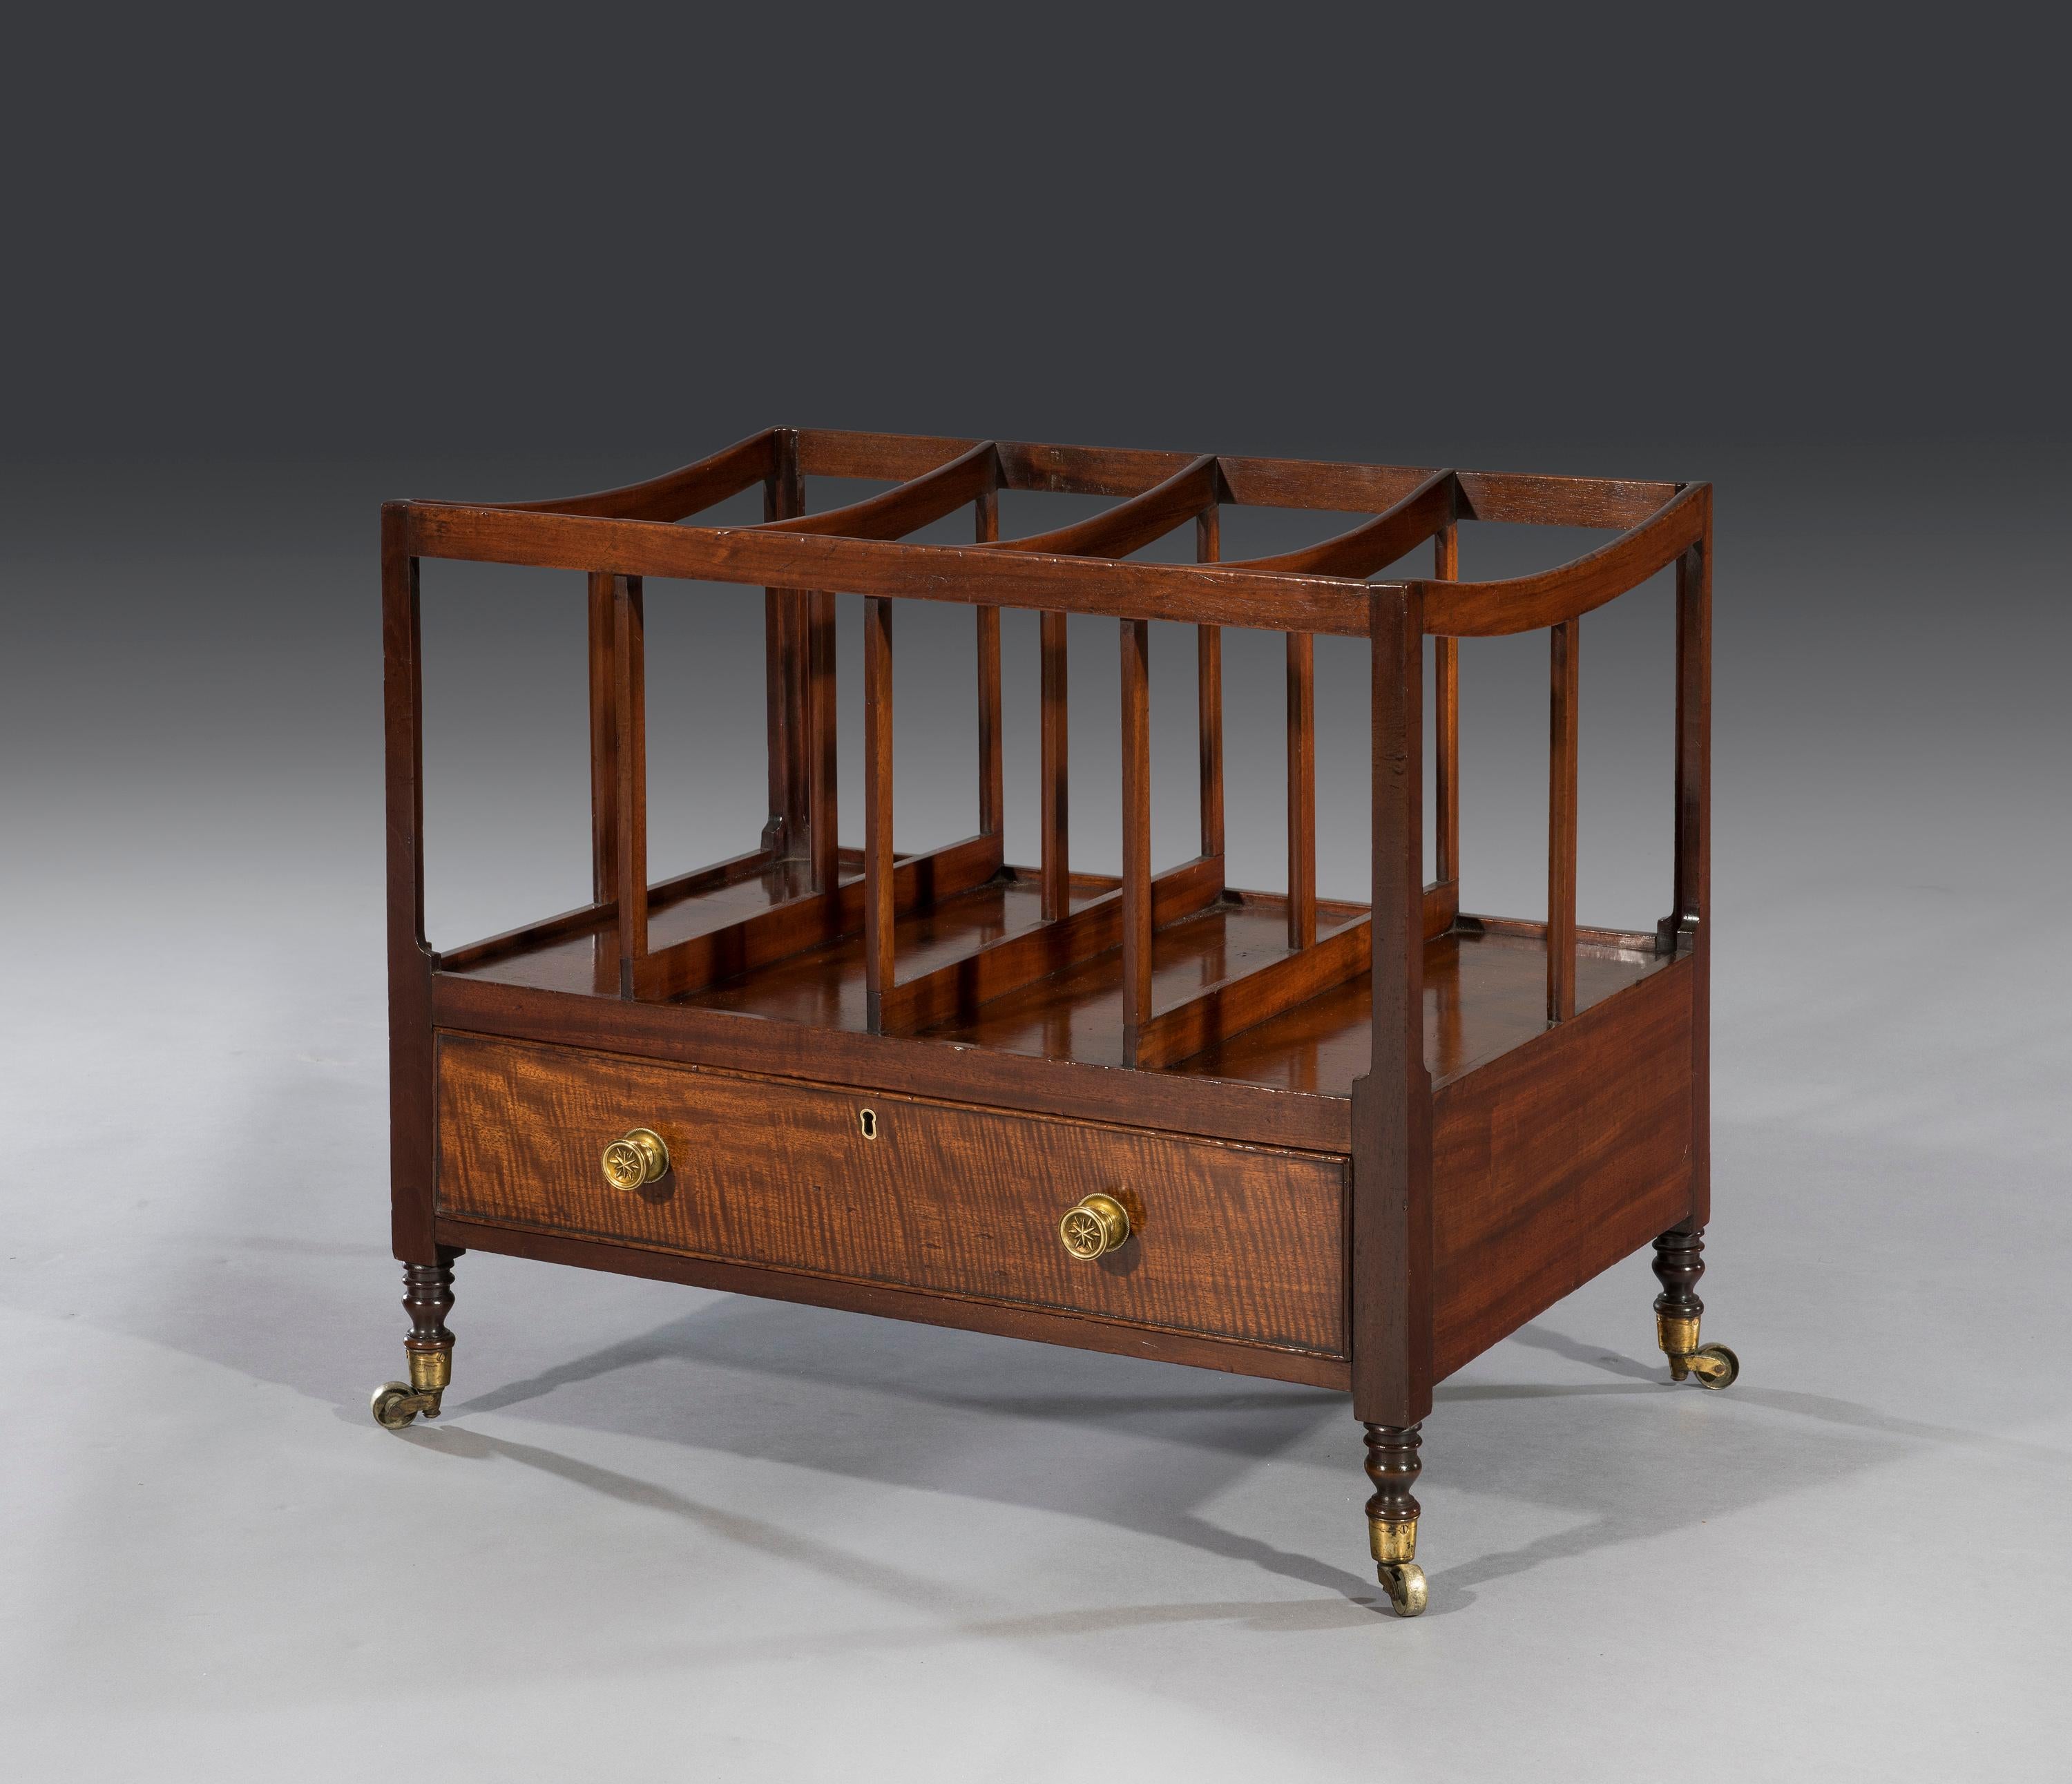 The oversized Canterbury is of elegant proportions with four divisions above a figured mahogany drawer. The Canterbury stands four turned legs and terminates on the original brass castors.